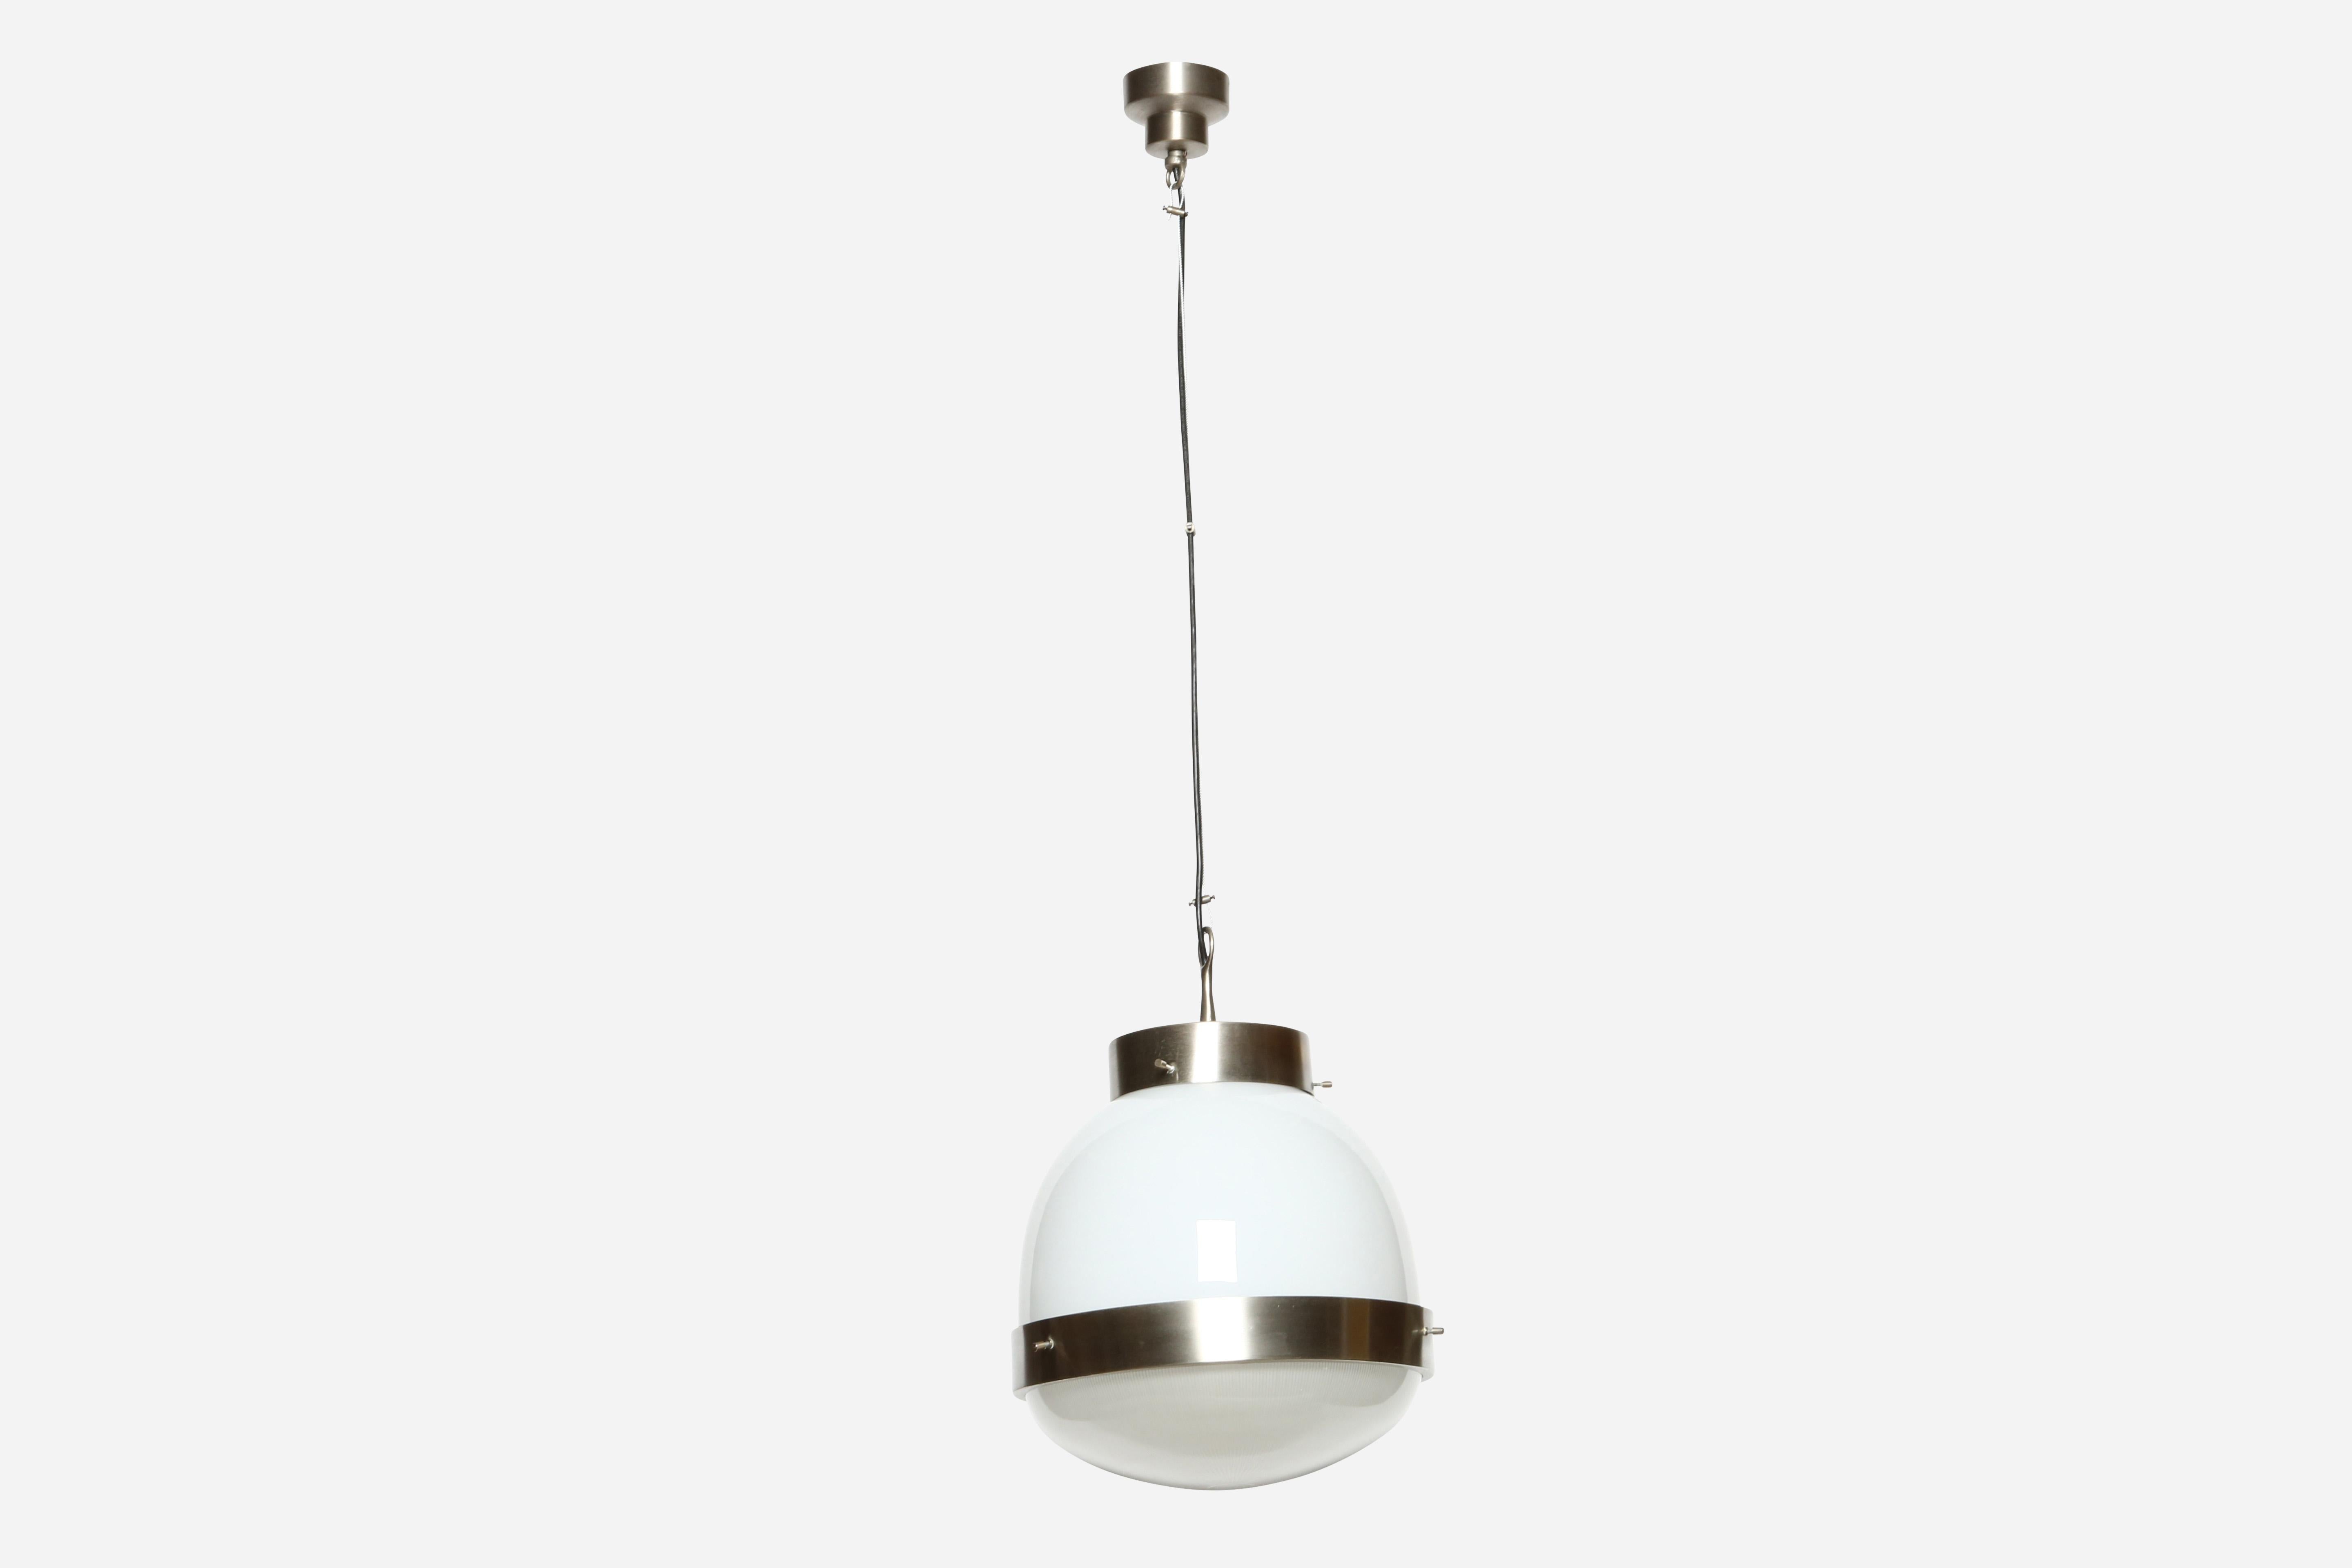 Sergio Mazza ceiling pendant Delta for Artemide.
Italy 1950s.
Textured glass, opaline glass, nickel-plated brass.
One medium base socket.
Complimentary US rewiring upon request.
Height adjustable.